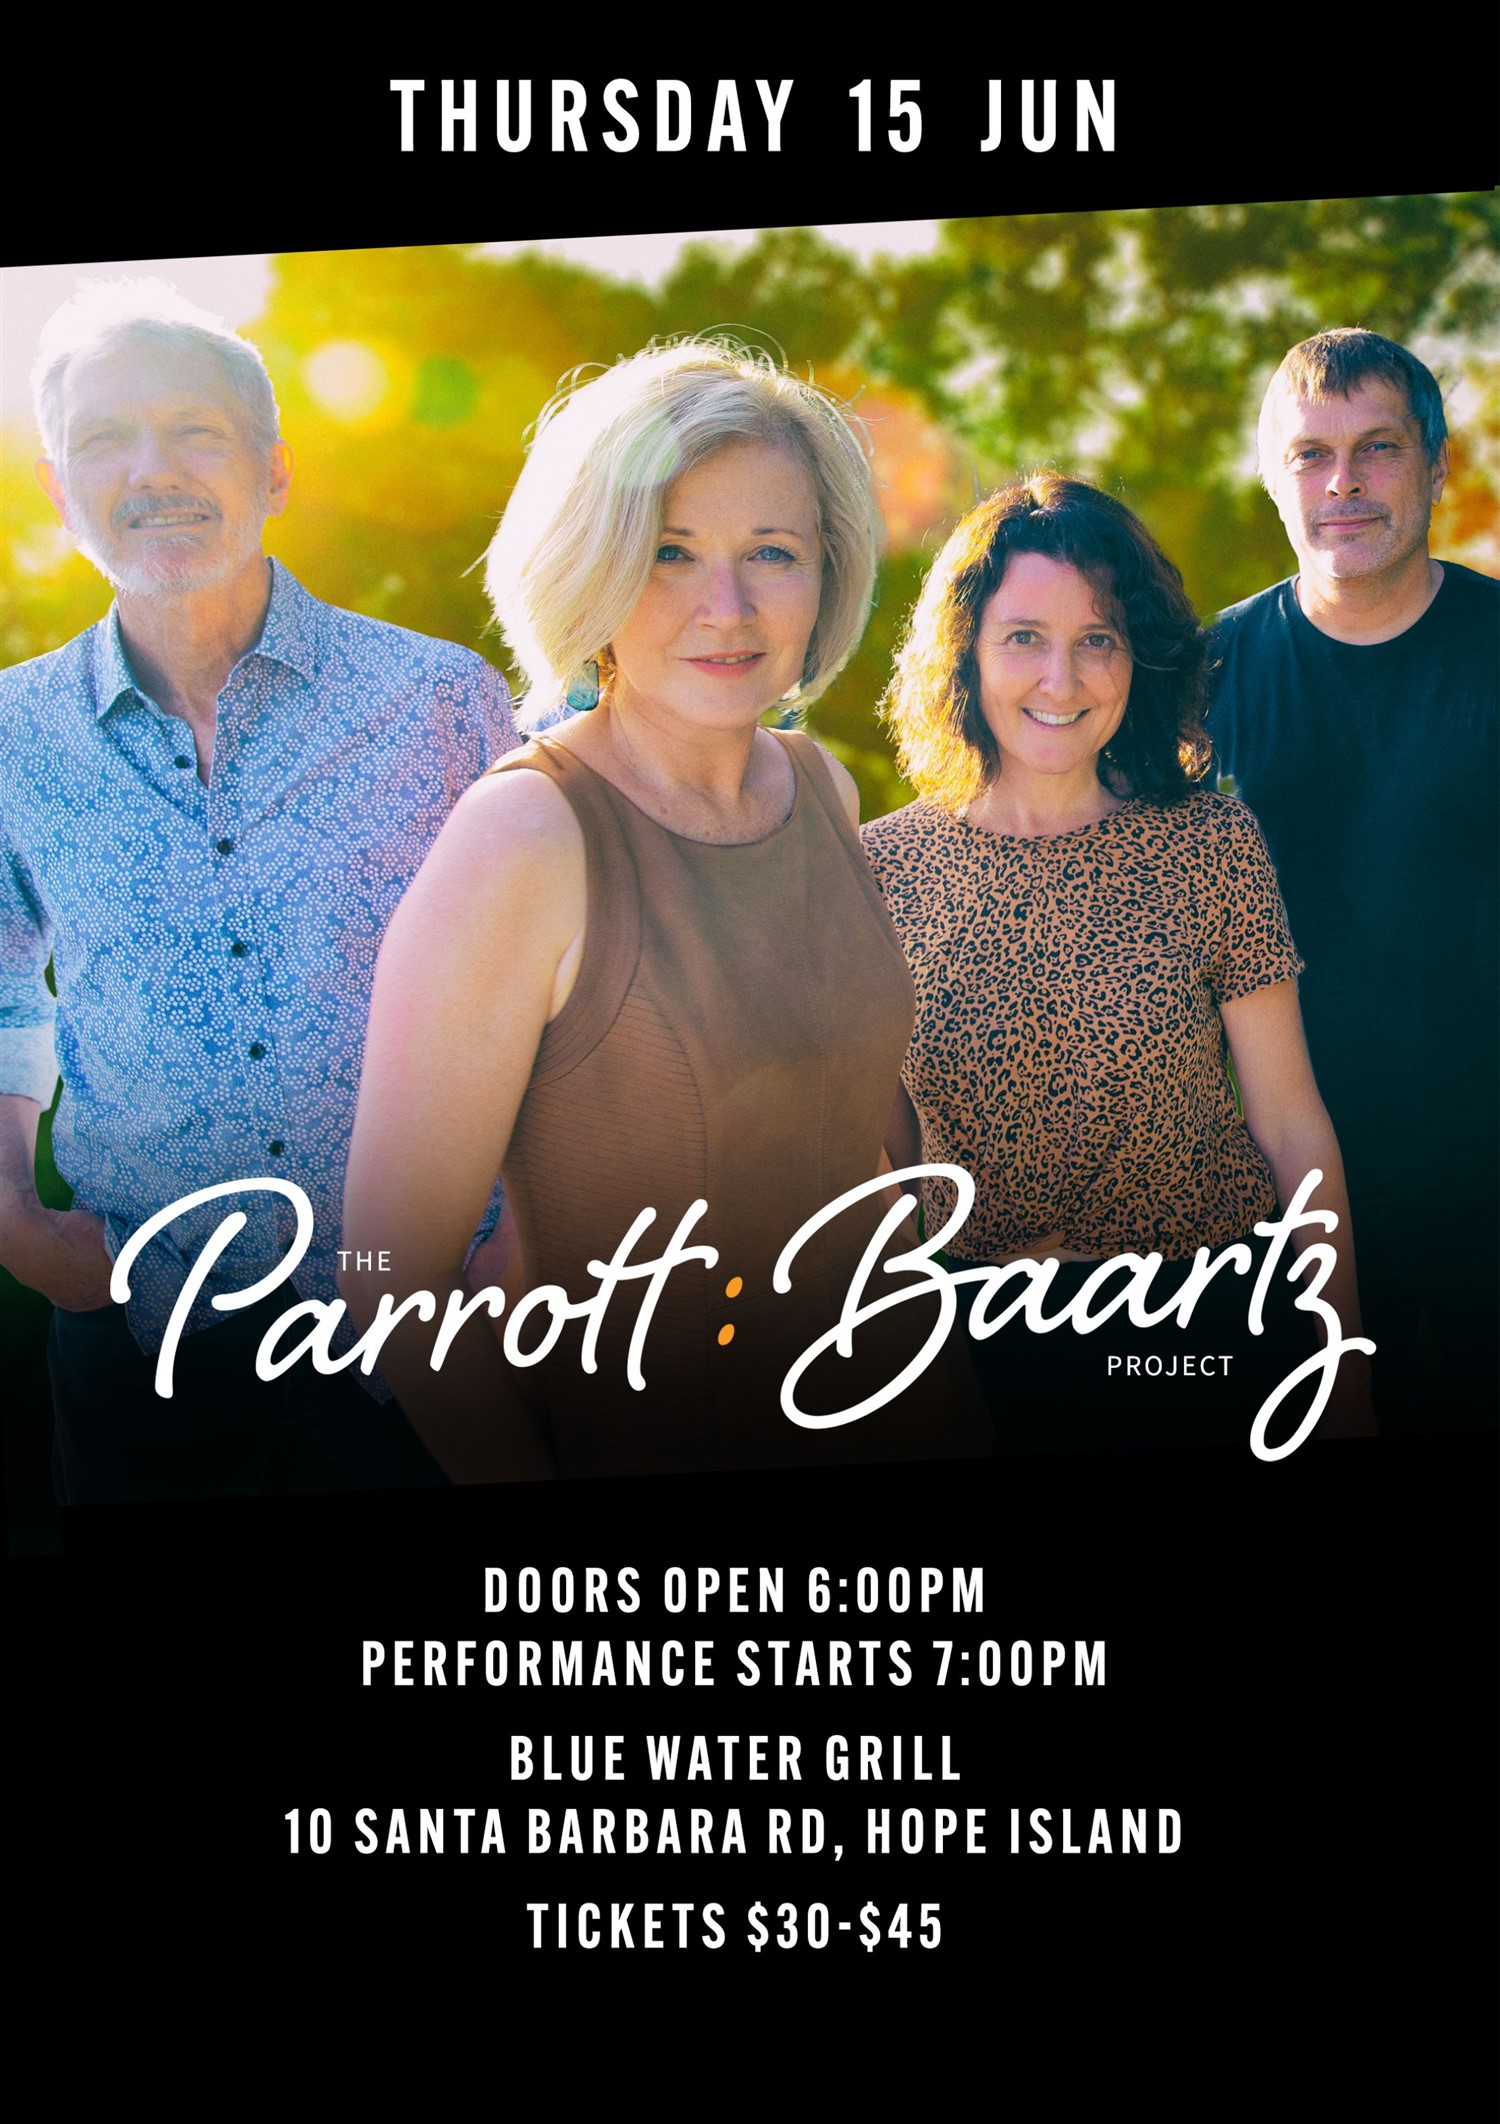 The Parrott:Baartz Project  on Jun 15, 18:00@Hope Island Jazz - Blue Water Grill - Buy tickets and Get information on Hope Island Jazz hopeislandjazz.com.au